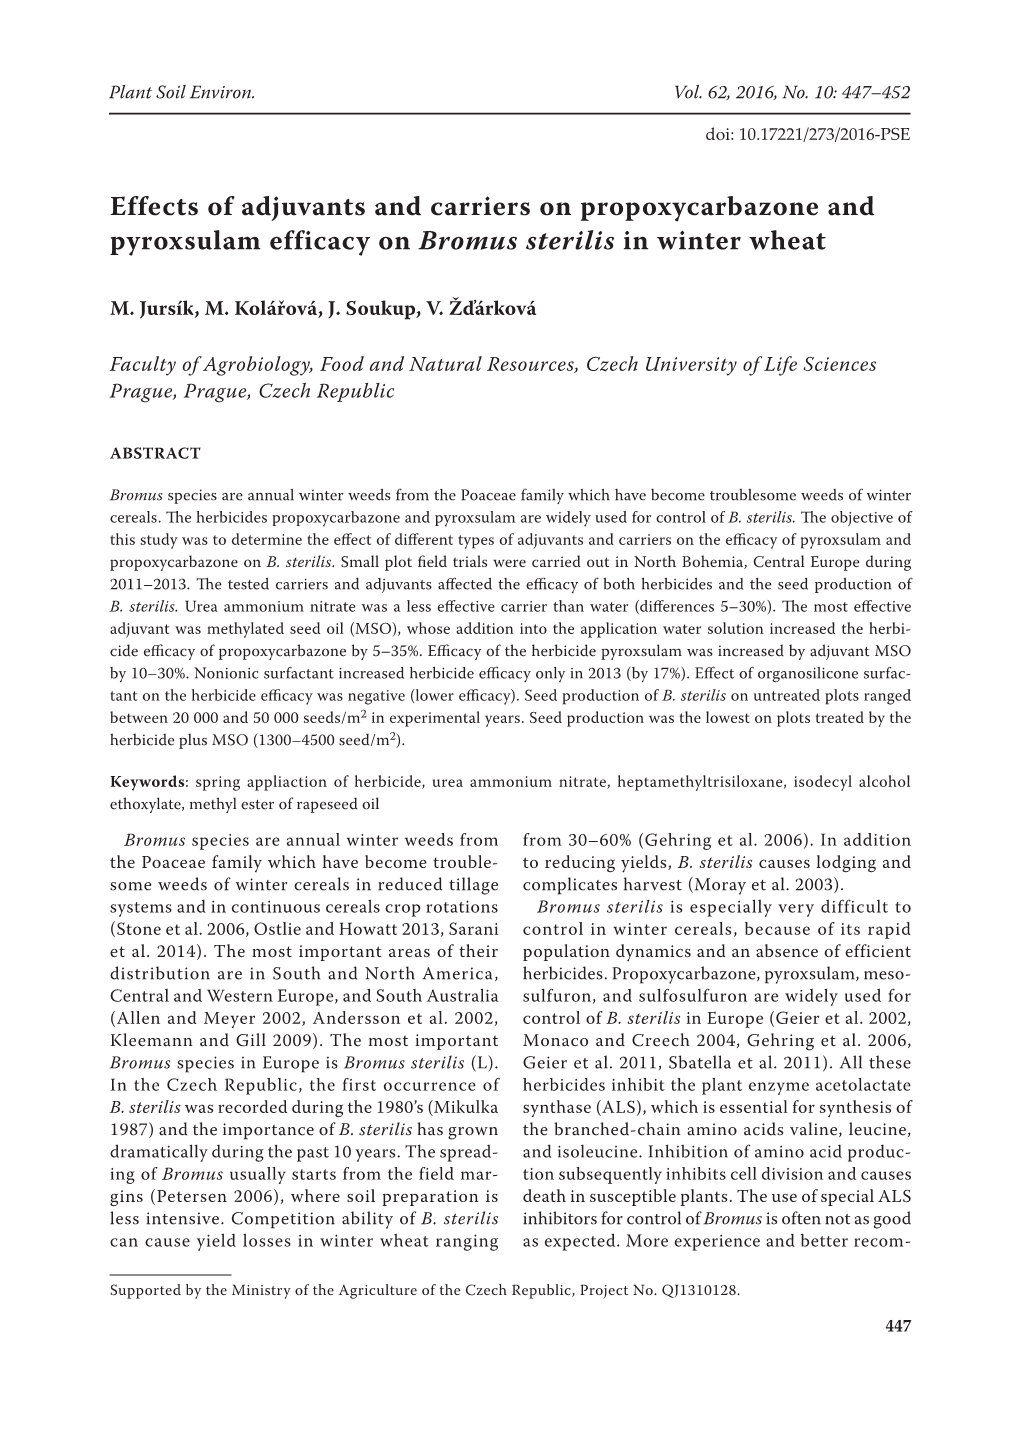 Effects of Adjuvants and Carriers on Propoxycarbazone and Pyroxsulam Efficacy on Bromus Sterilis in Winter Wheat